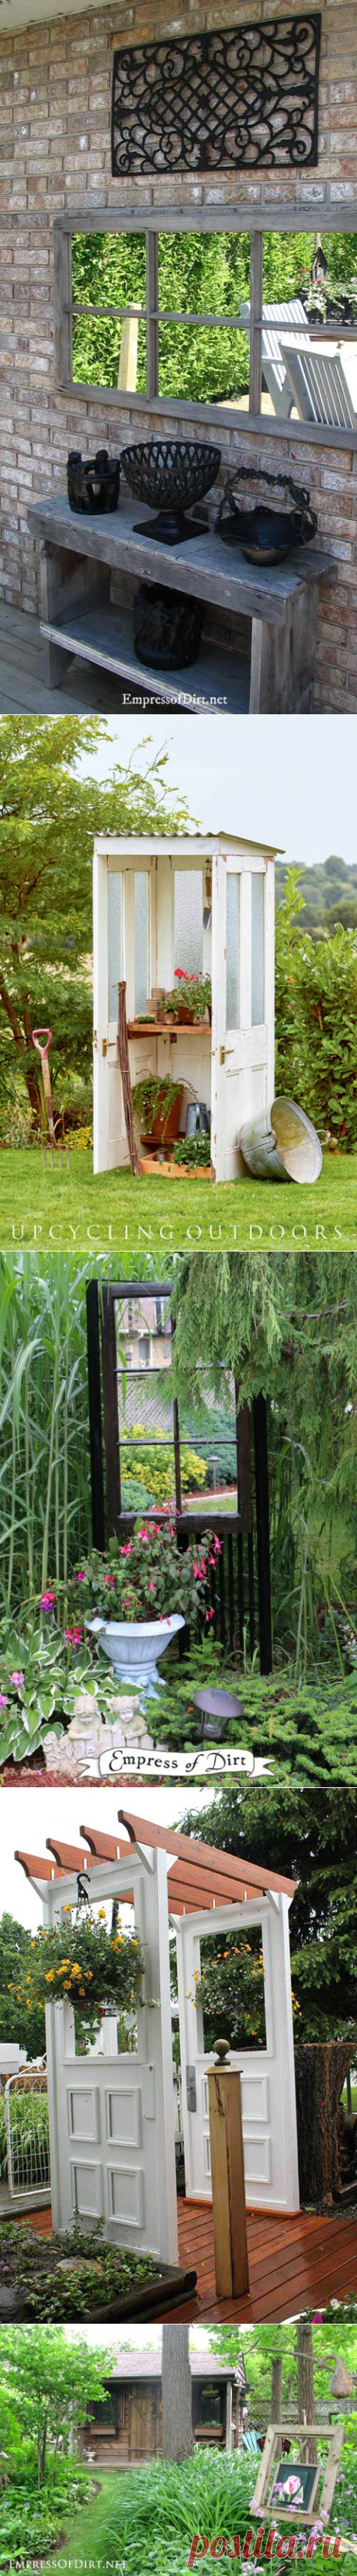 20 Ideas For Old Doors and Windows in the Garden | Empress of Dirt